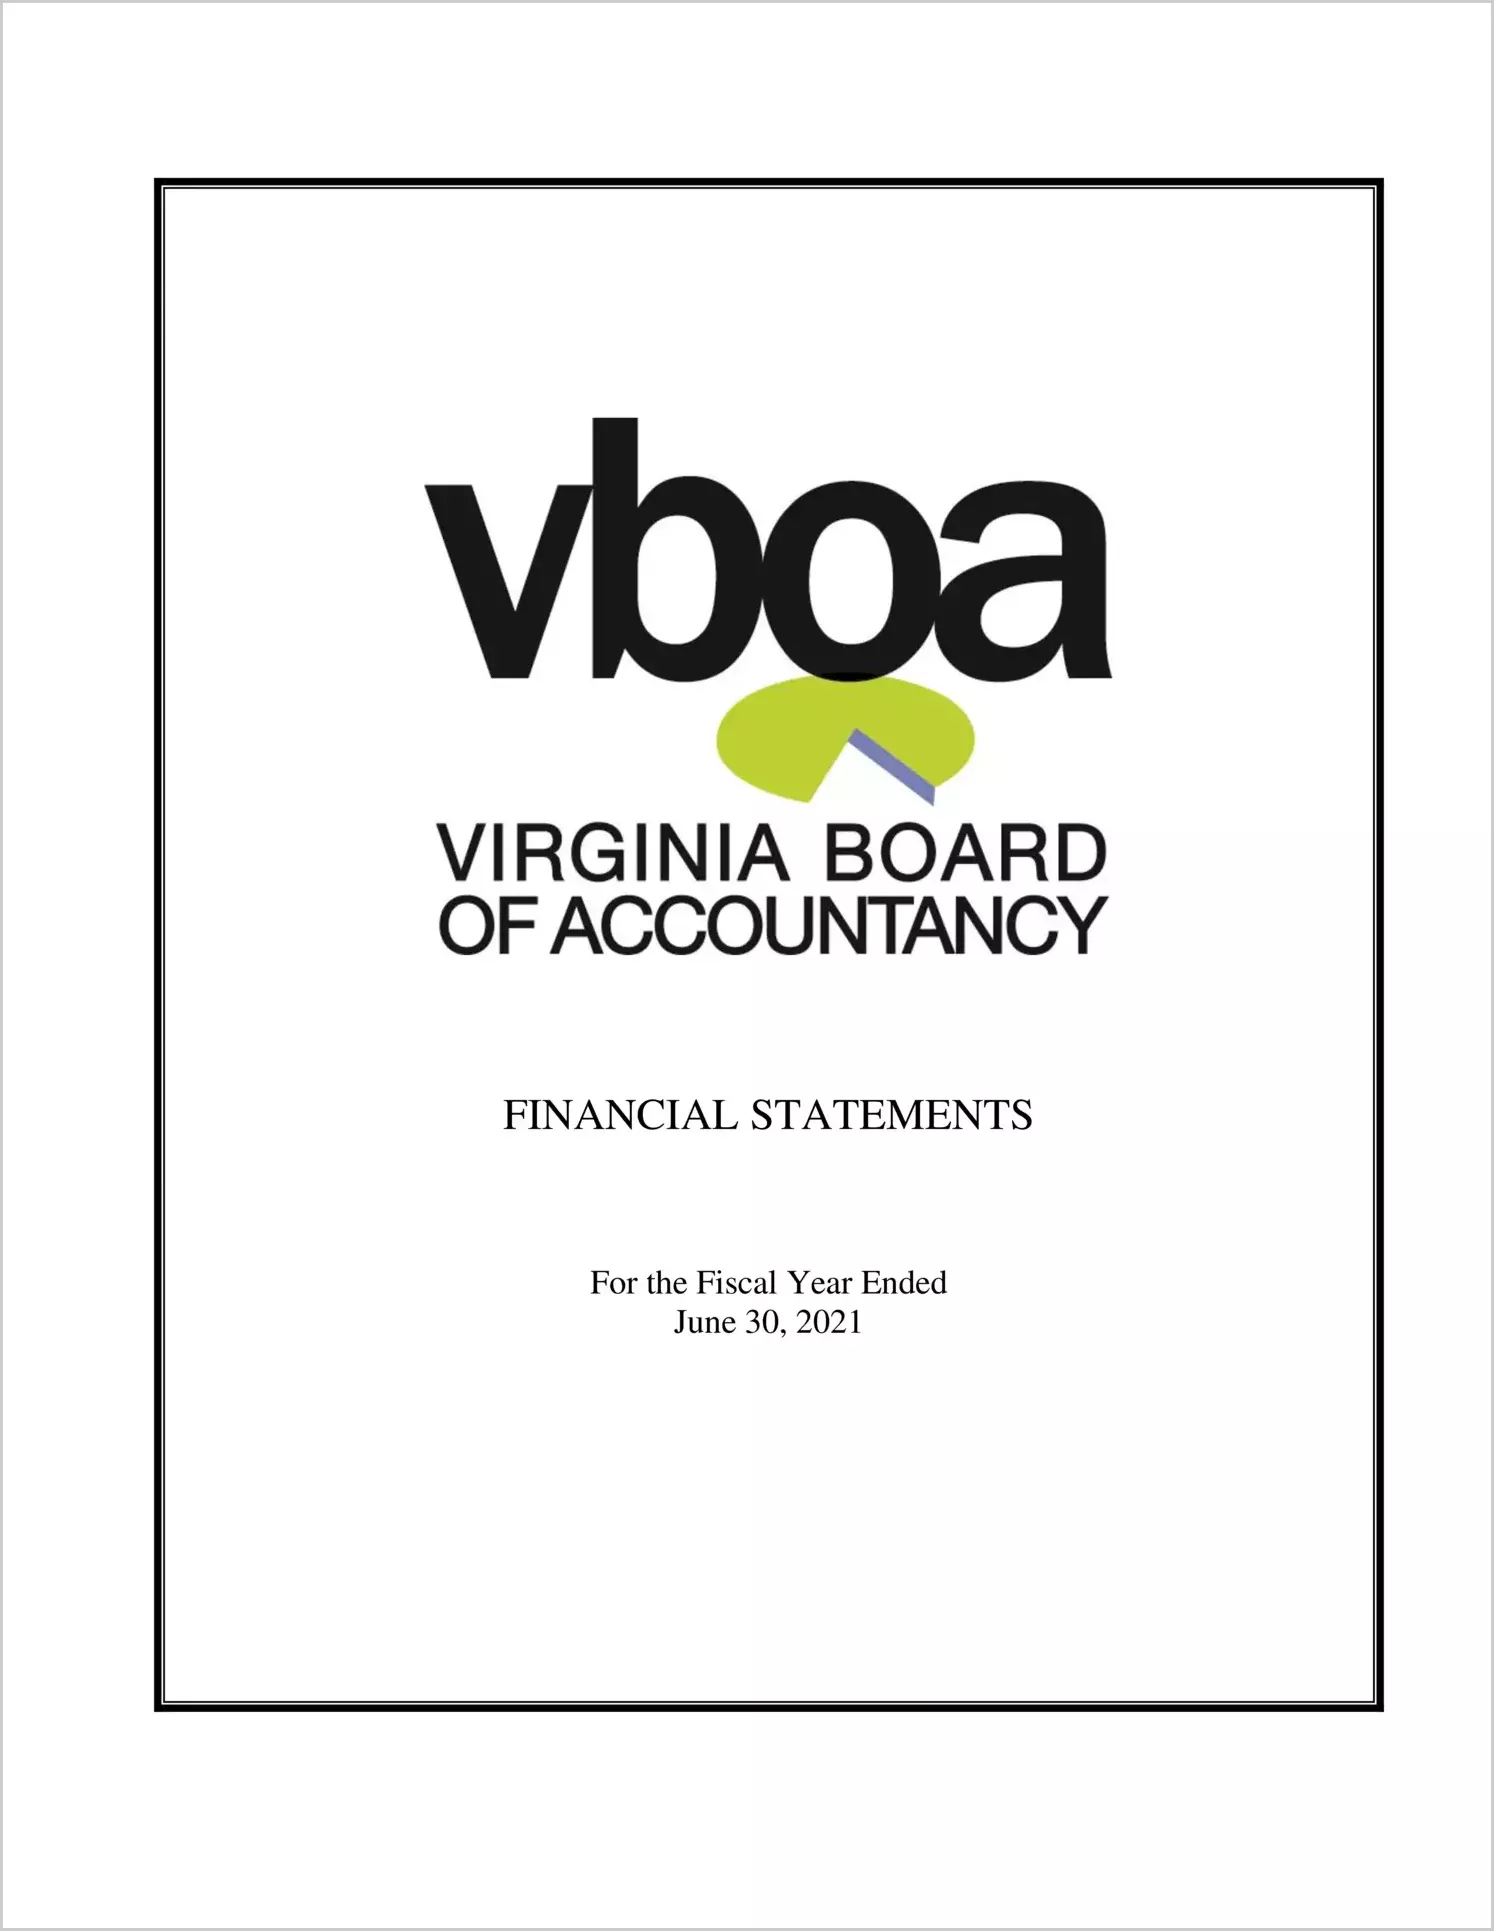 Virginia Board of Accountancy Financial Statements for the year ended June 30, 2021